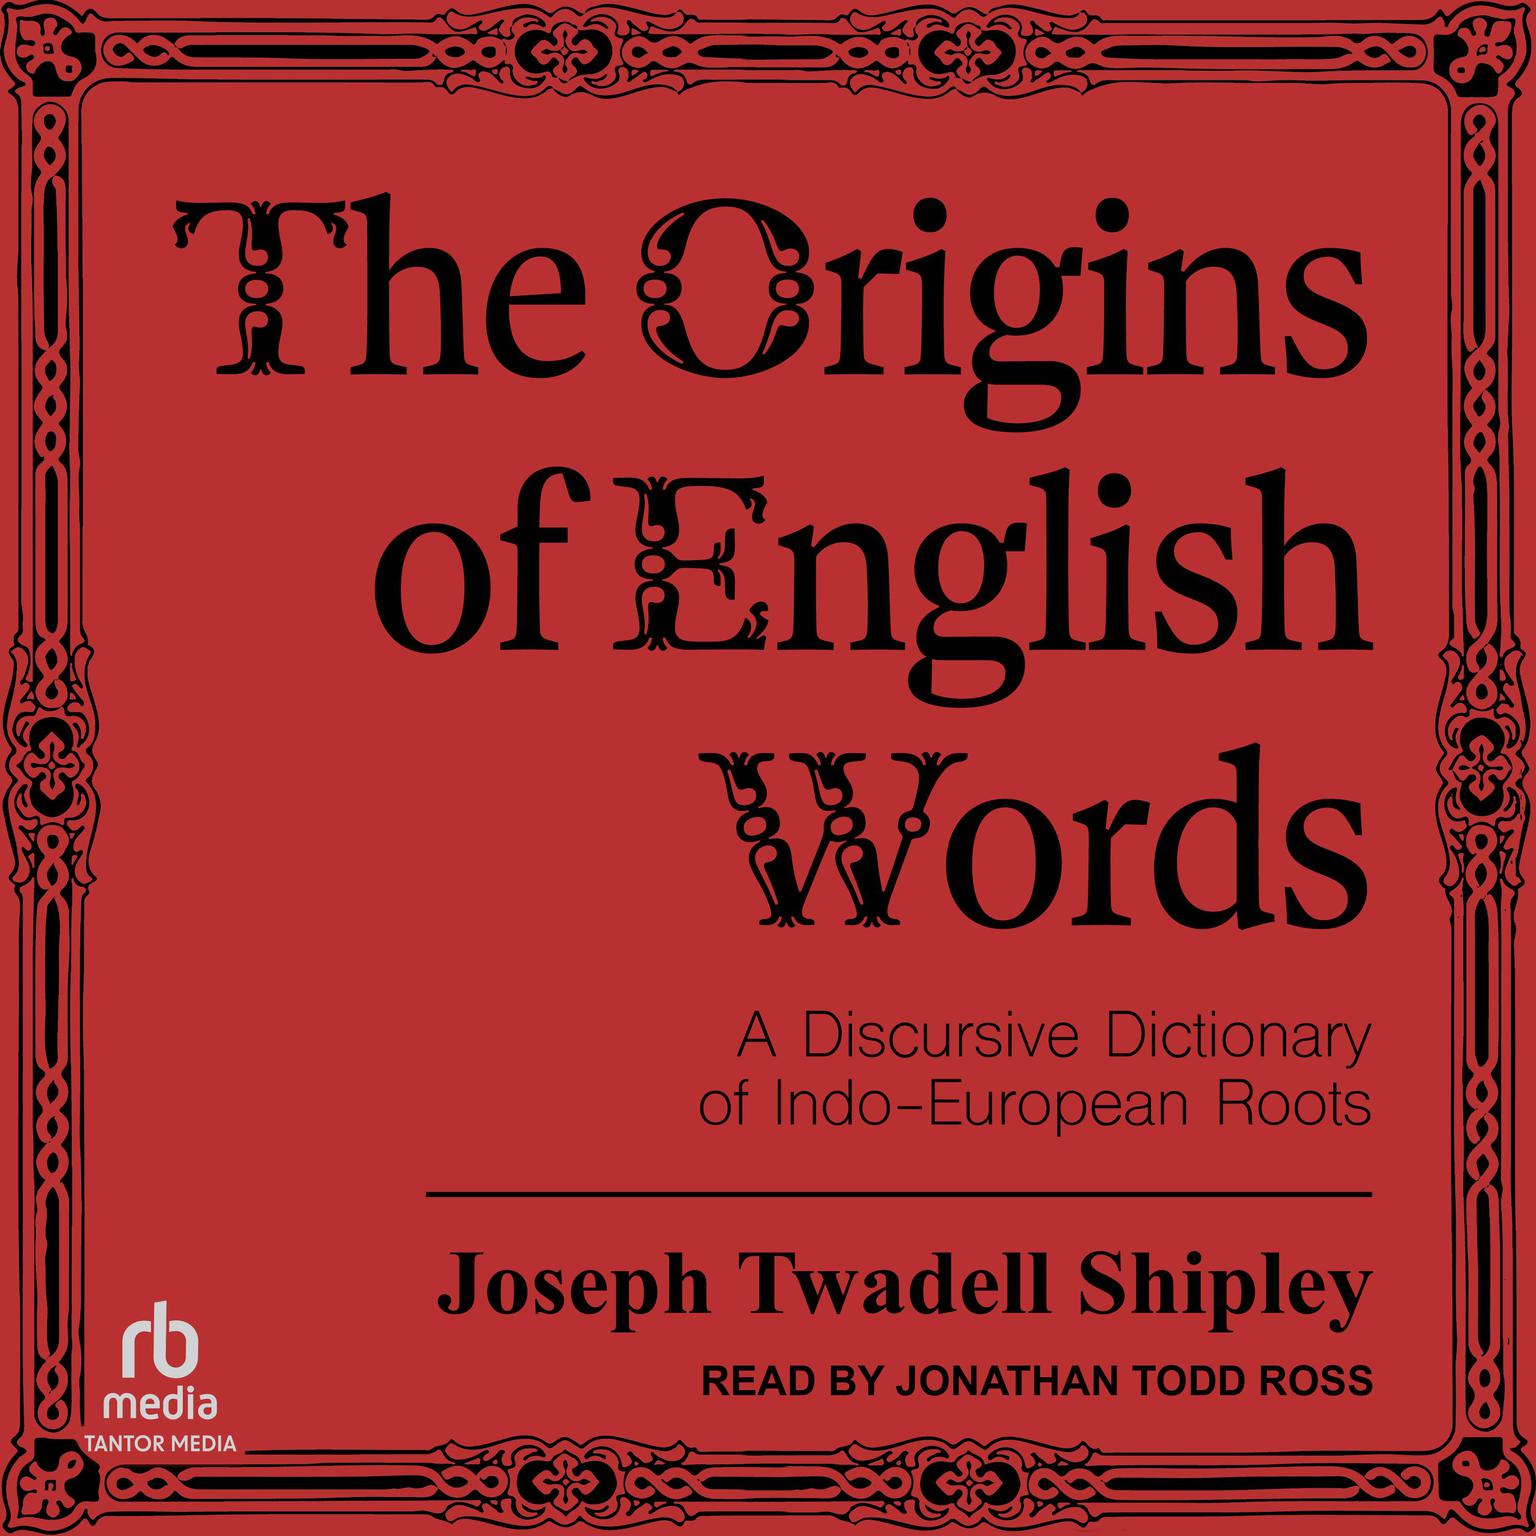 The Origins of English Words: A Discursive Dictionary of Indo-European Roots Audiobook, by Joseph Twadell Shipley